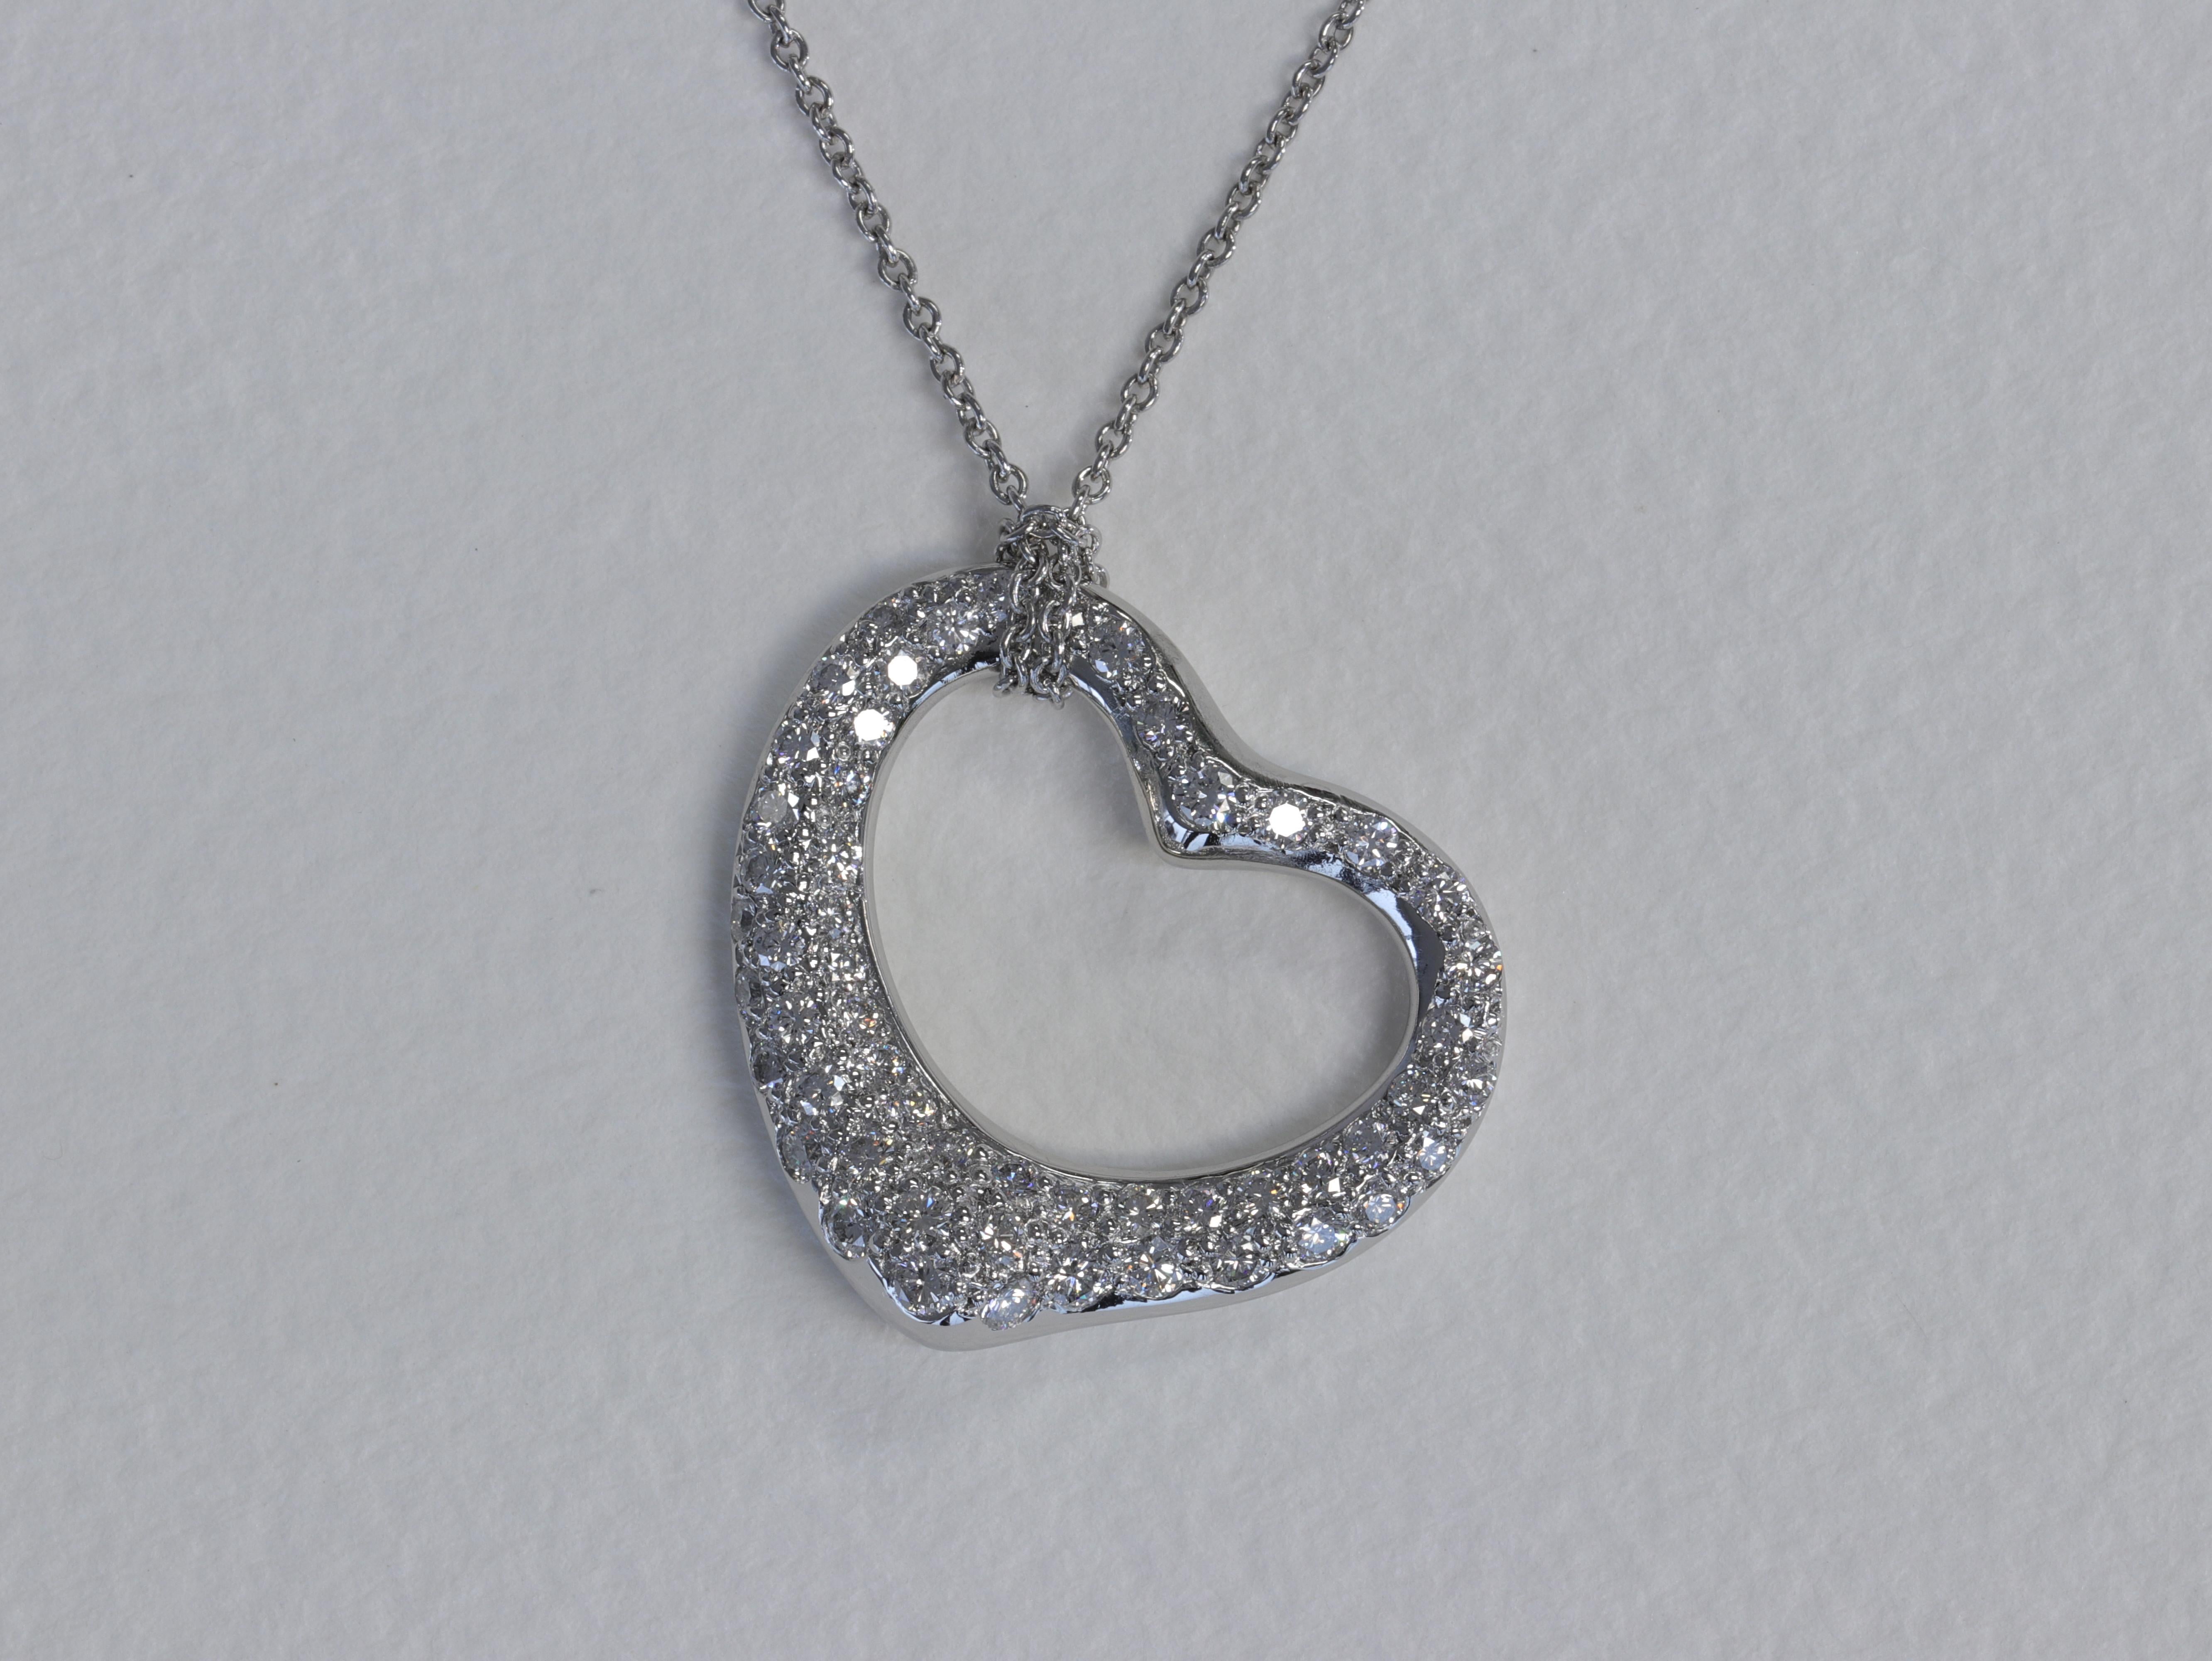 A timeless Elsa Peretti design for Tiffany & Co. the pave diamond and platinum Open Heart pendant on a platinum Tiffany & Co. chain. 

The diamonds are round brilliant cuts and are fine quality with colors of E-F and clarities of VS1+.

The pendant